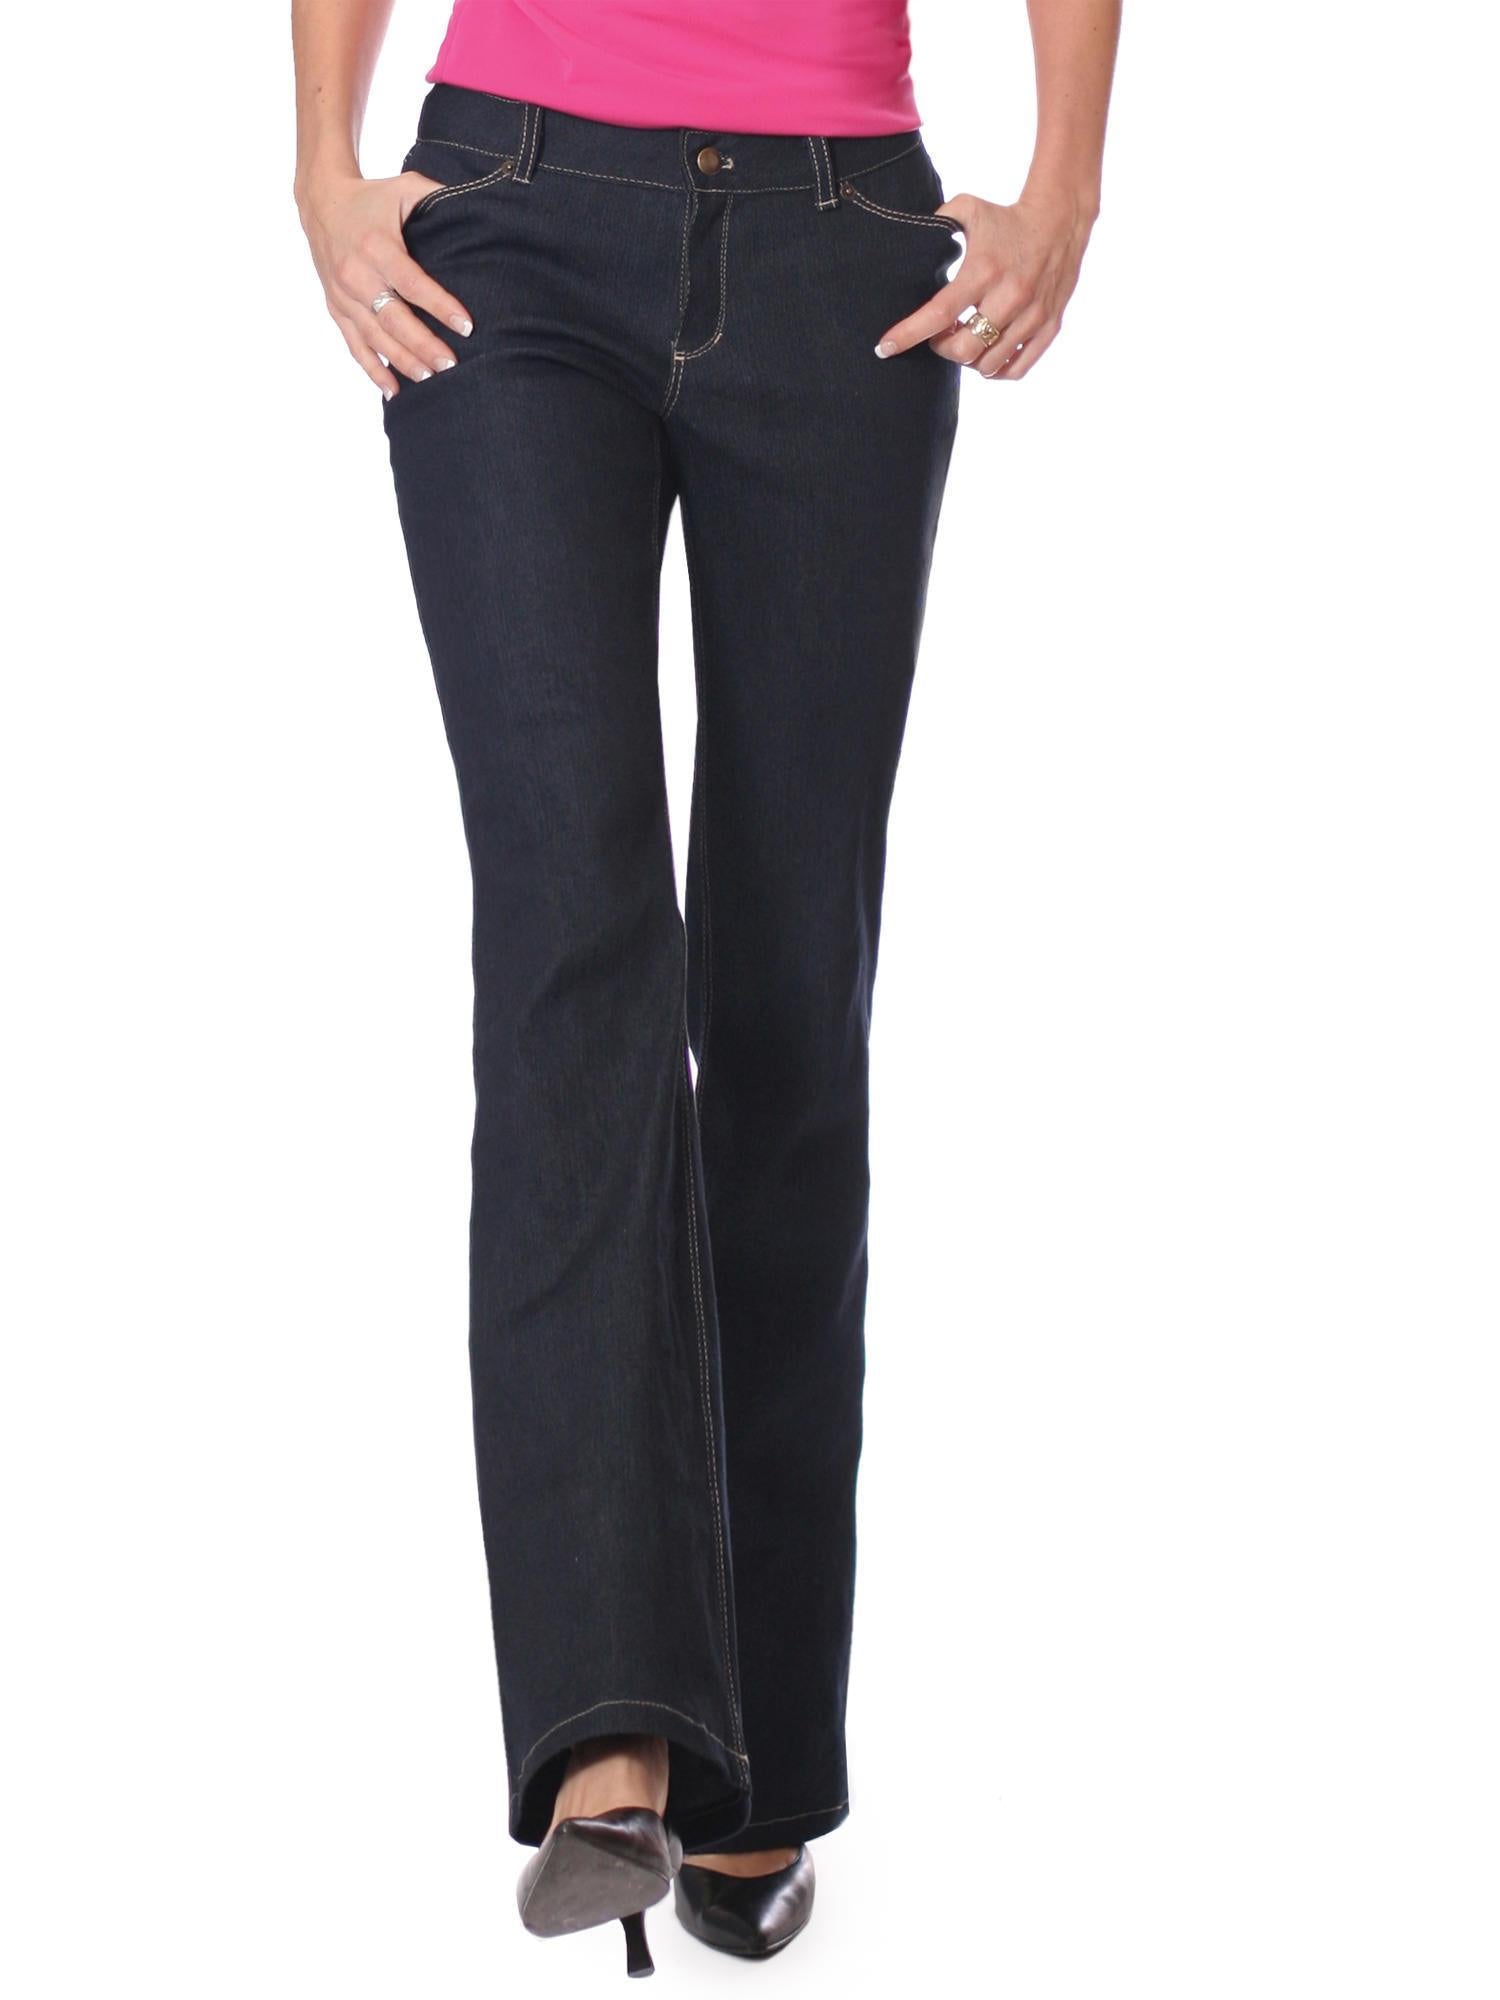 Jalie 2908 - Low-Rise Stretch Bootcut Jeans Pattern 